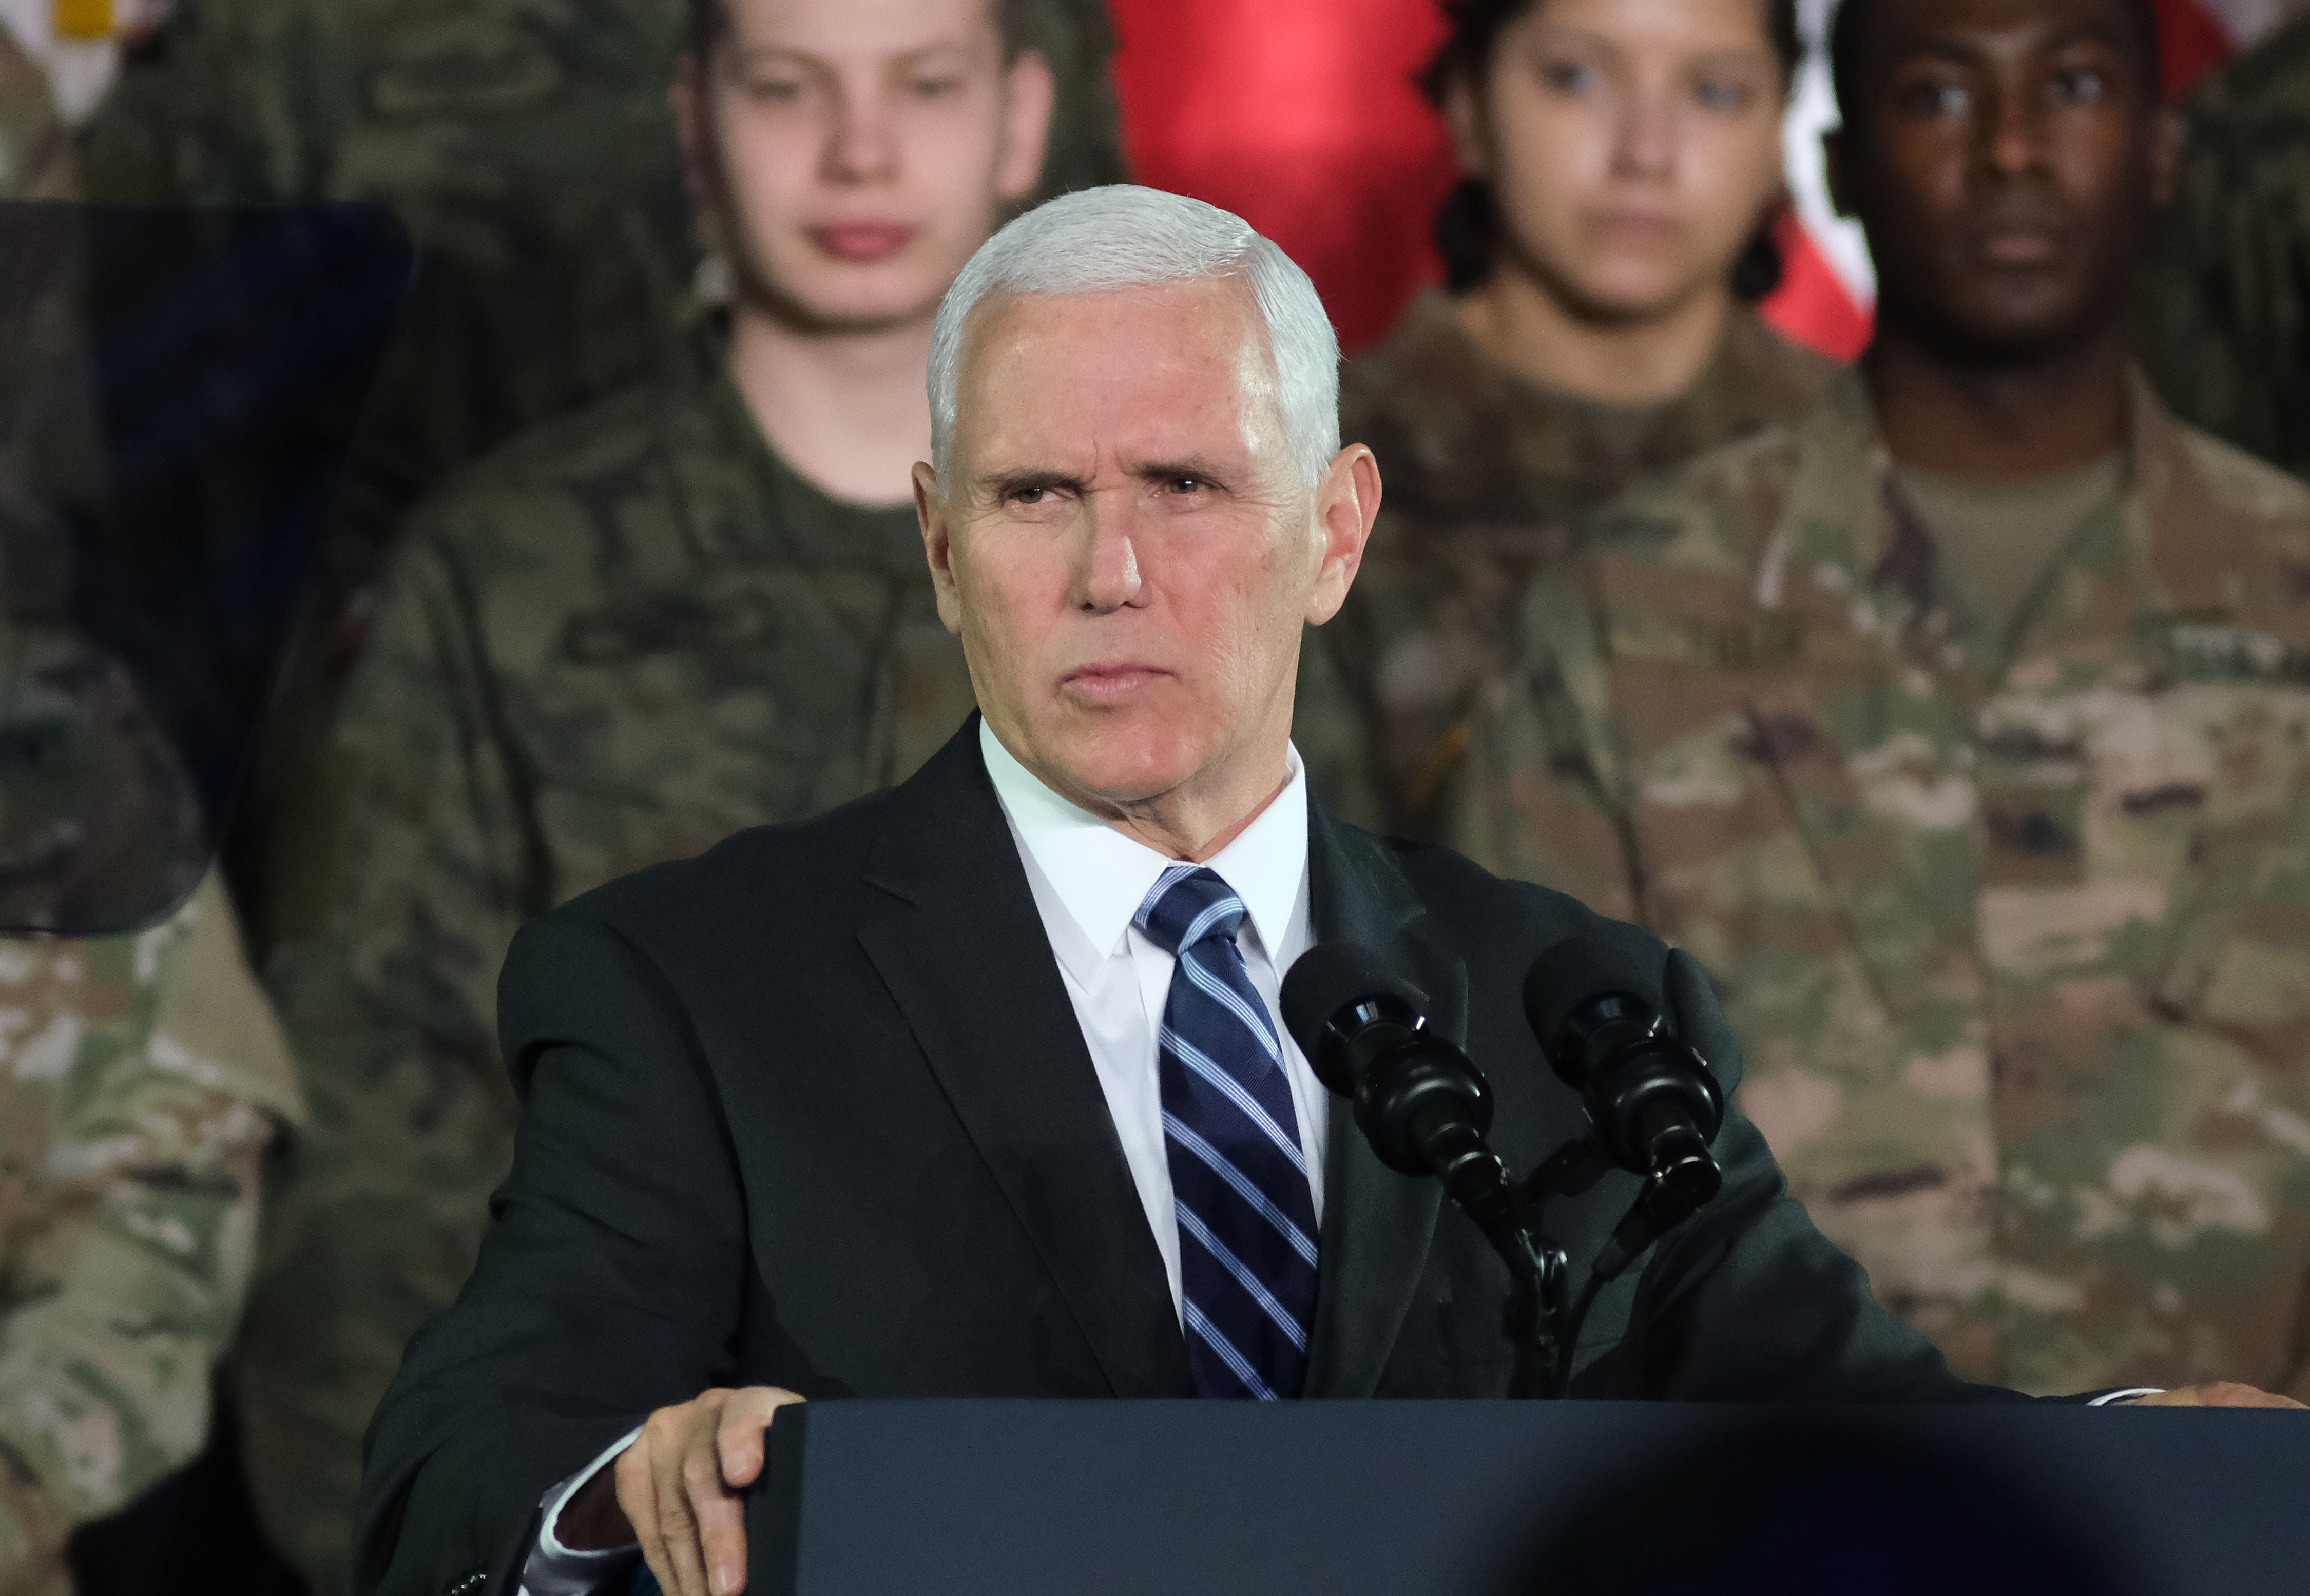 Vice President Mike Pence speaks while visiting Polish and U.S. soldiers at a military base on Feb. 13, 2019 in Warsaw, Poland. (Sean Gallup&mdash;Getty Images)